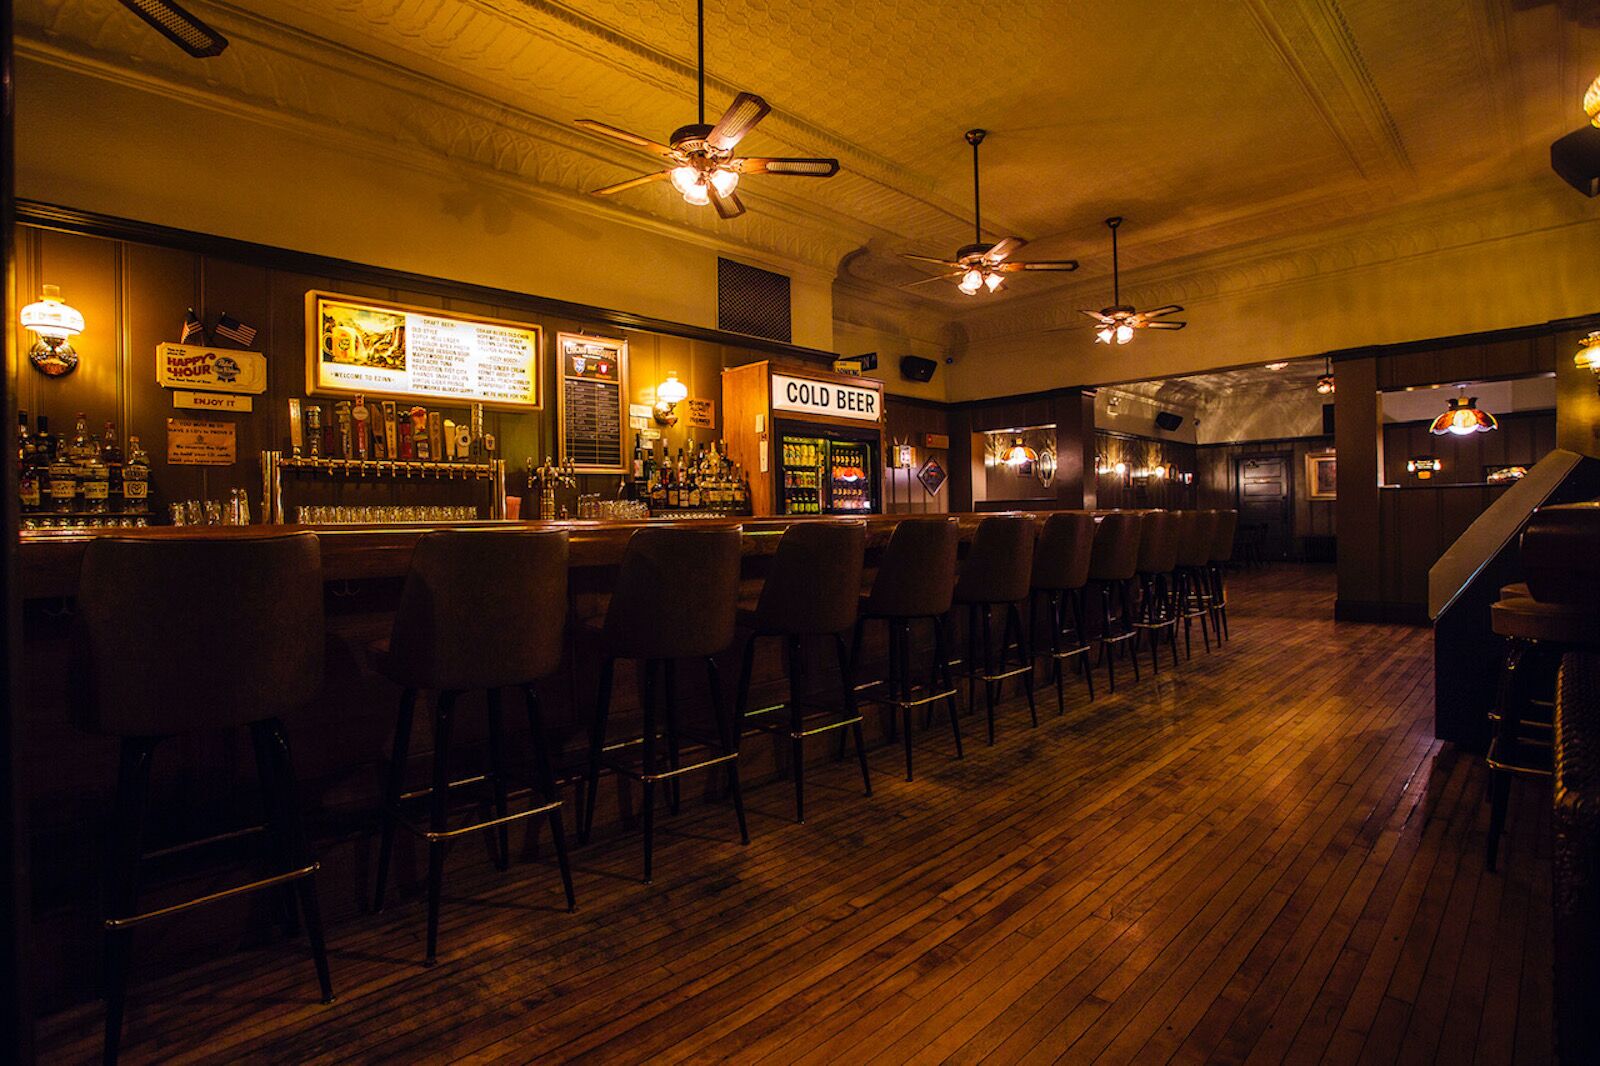 Interior of EZ with cold beer cooler, row of taps at the bar, and wooden floors